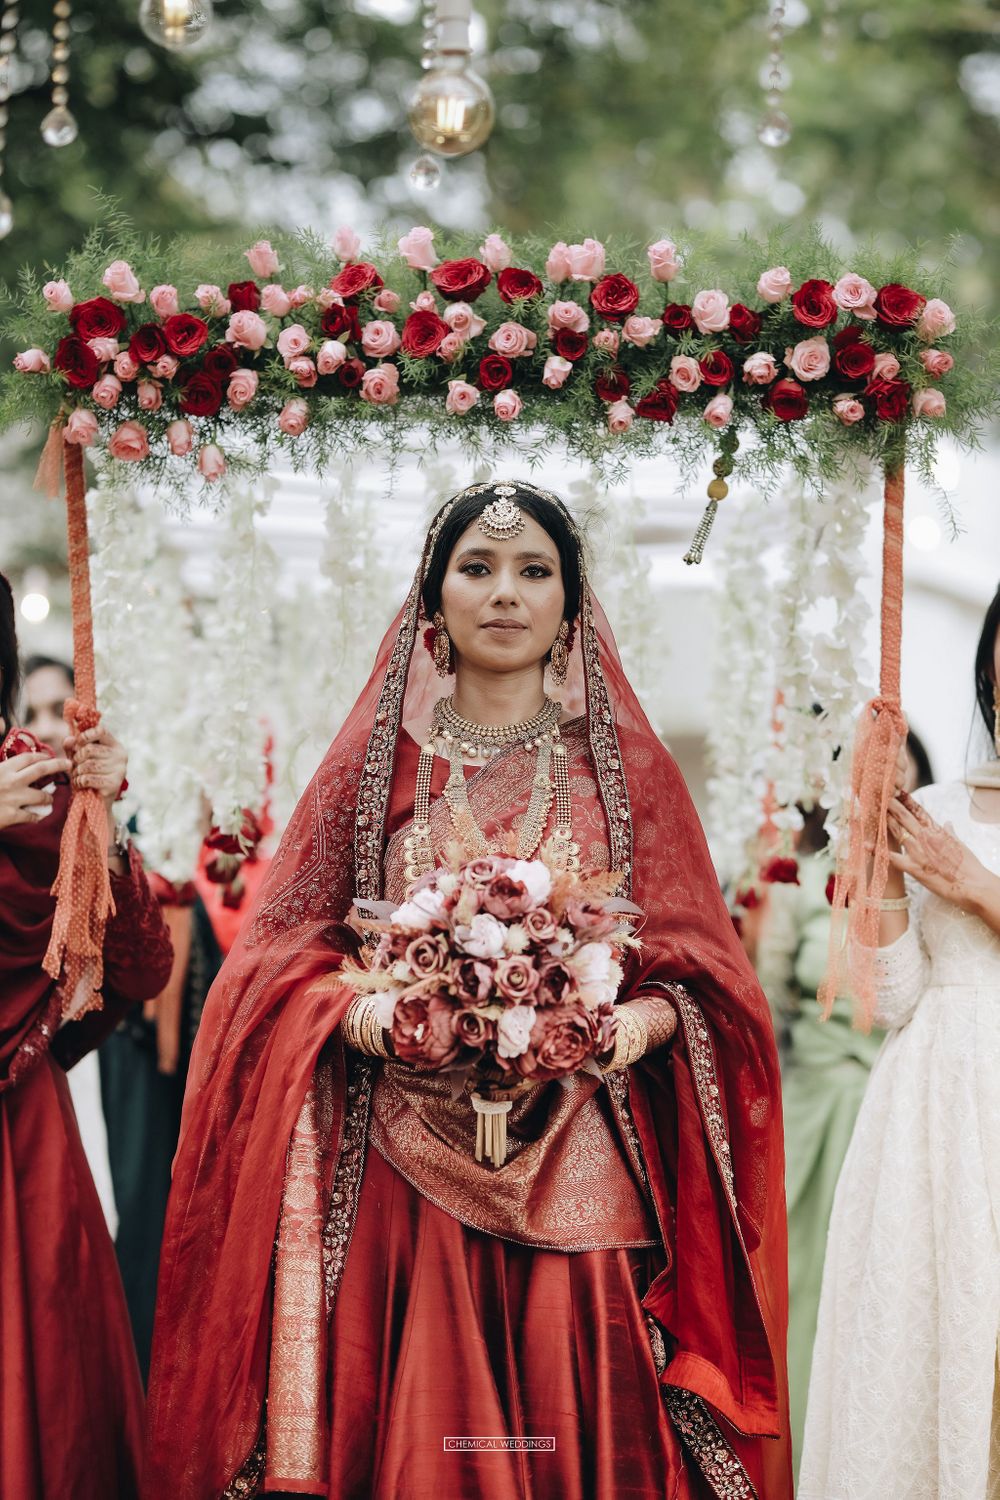 Photo of Bridal entry with flowers